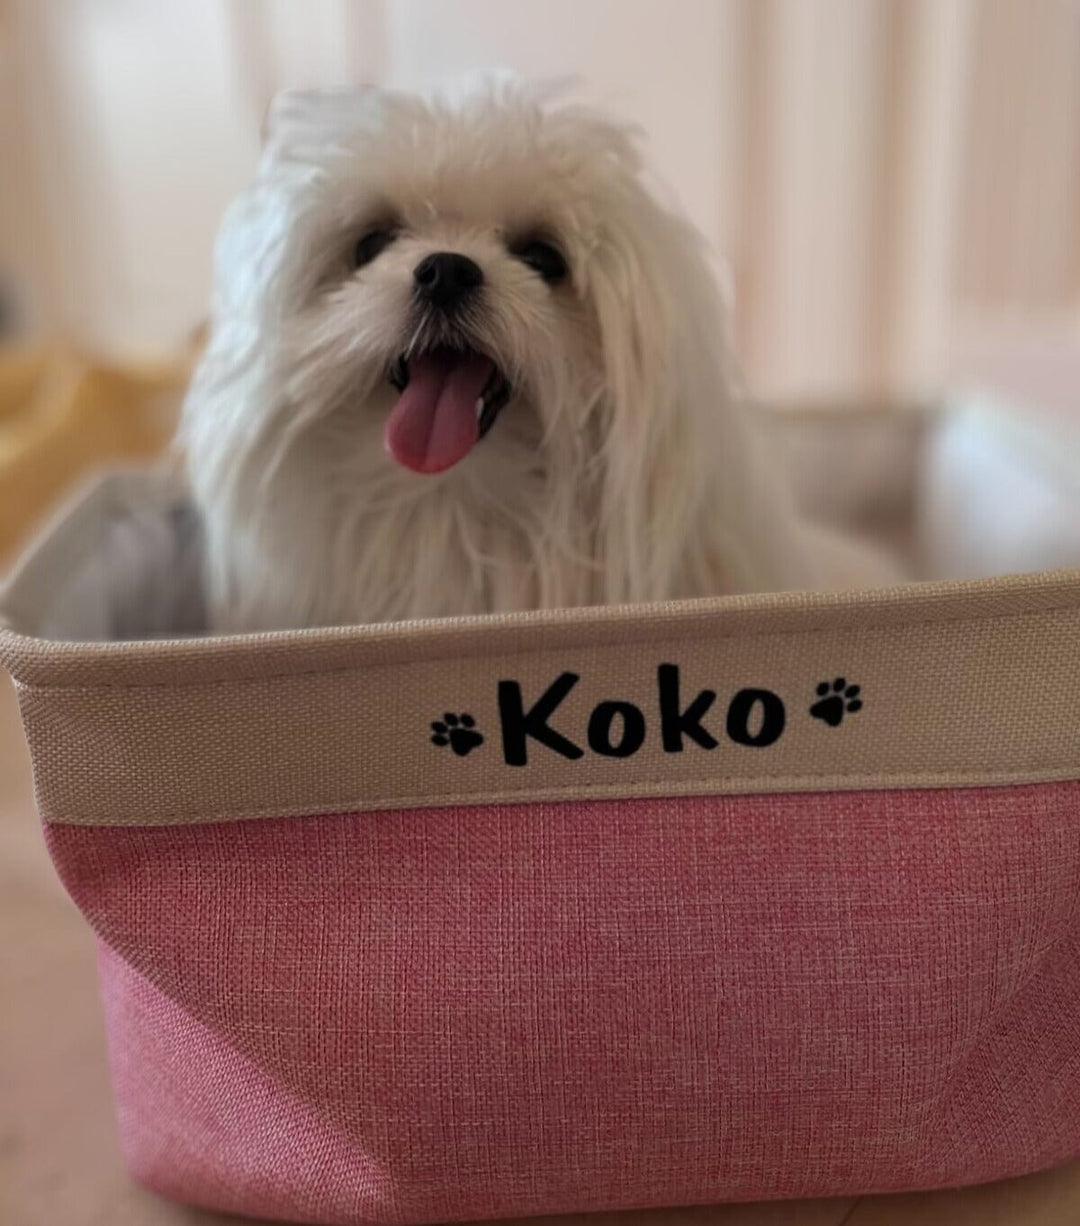 Dog Toy Box Personalized With Paw Hole, Dog Toy Storage, Dog Crate  Furniture Toy Bin Dog Mom Gift Puppy Toys Box 